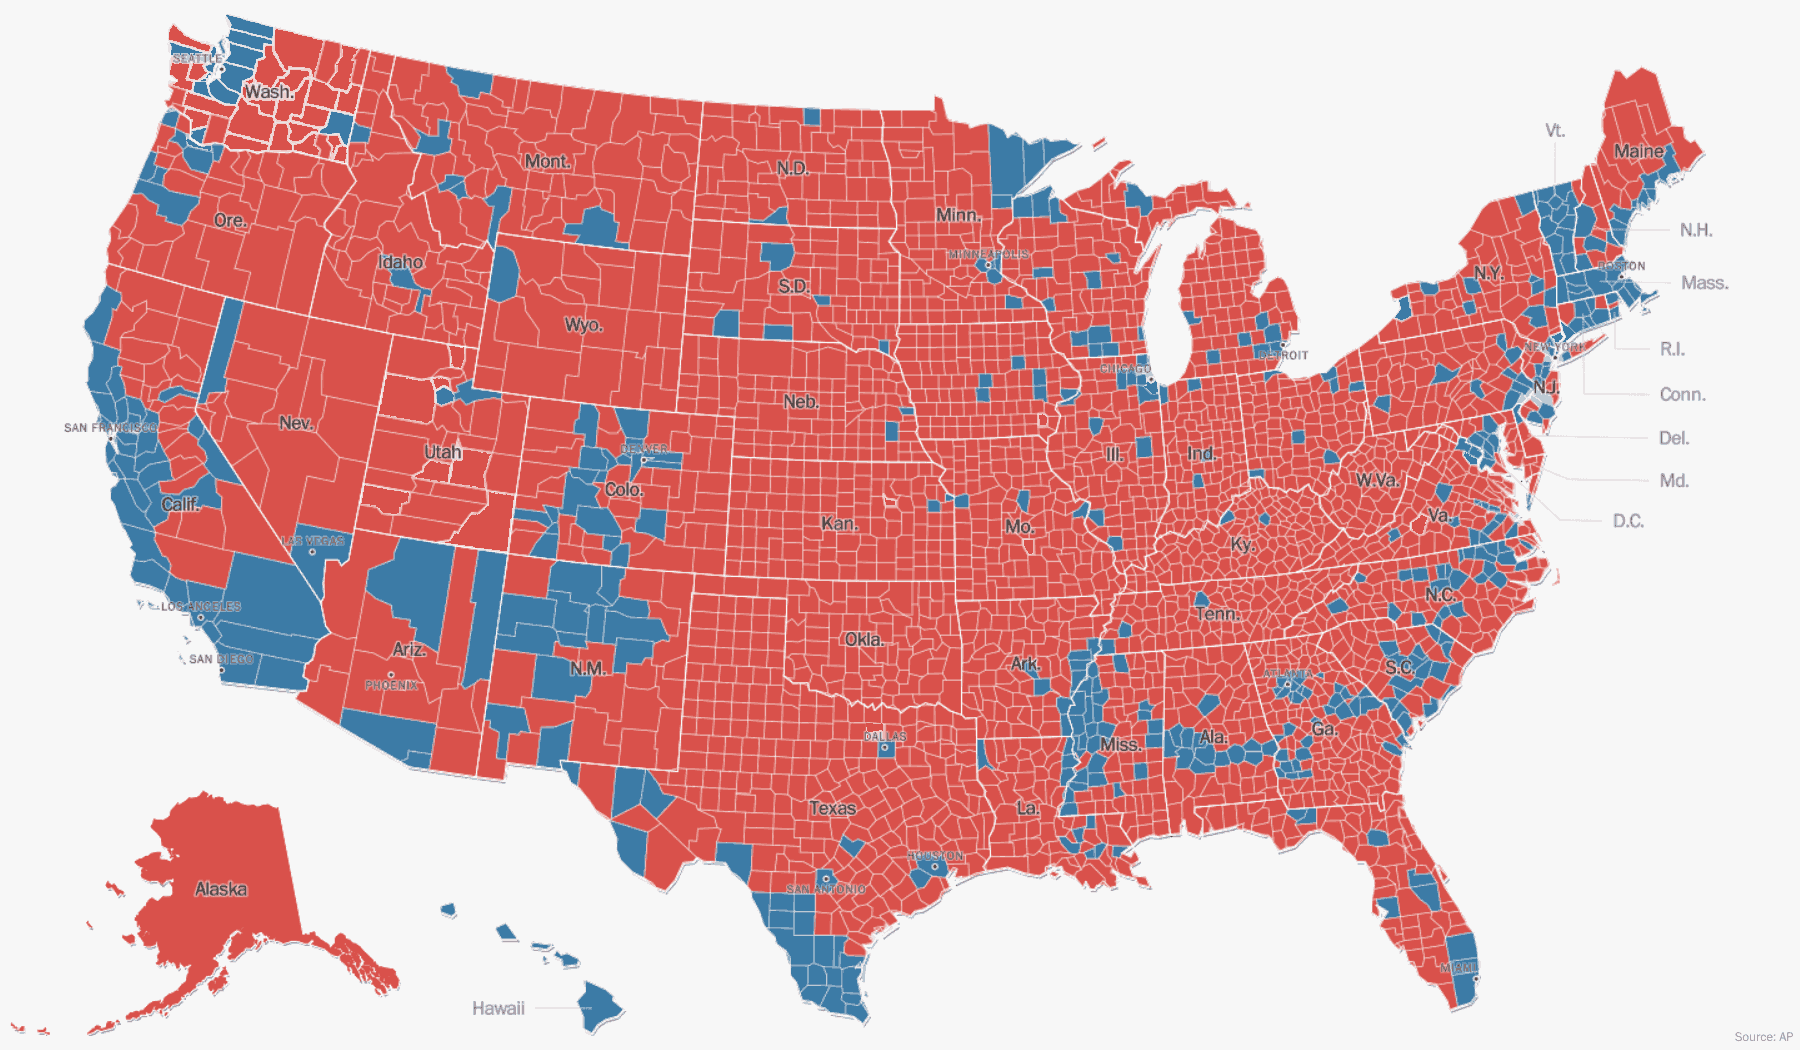 County-by-County results, 2016: Presidential election results, county-by-county, 2016. Some counties have been darkened to fix the AP’s inability to call an election a month after it was held.; presidential elections; Election 2016